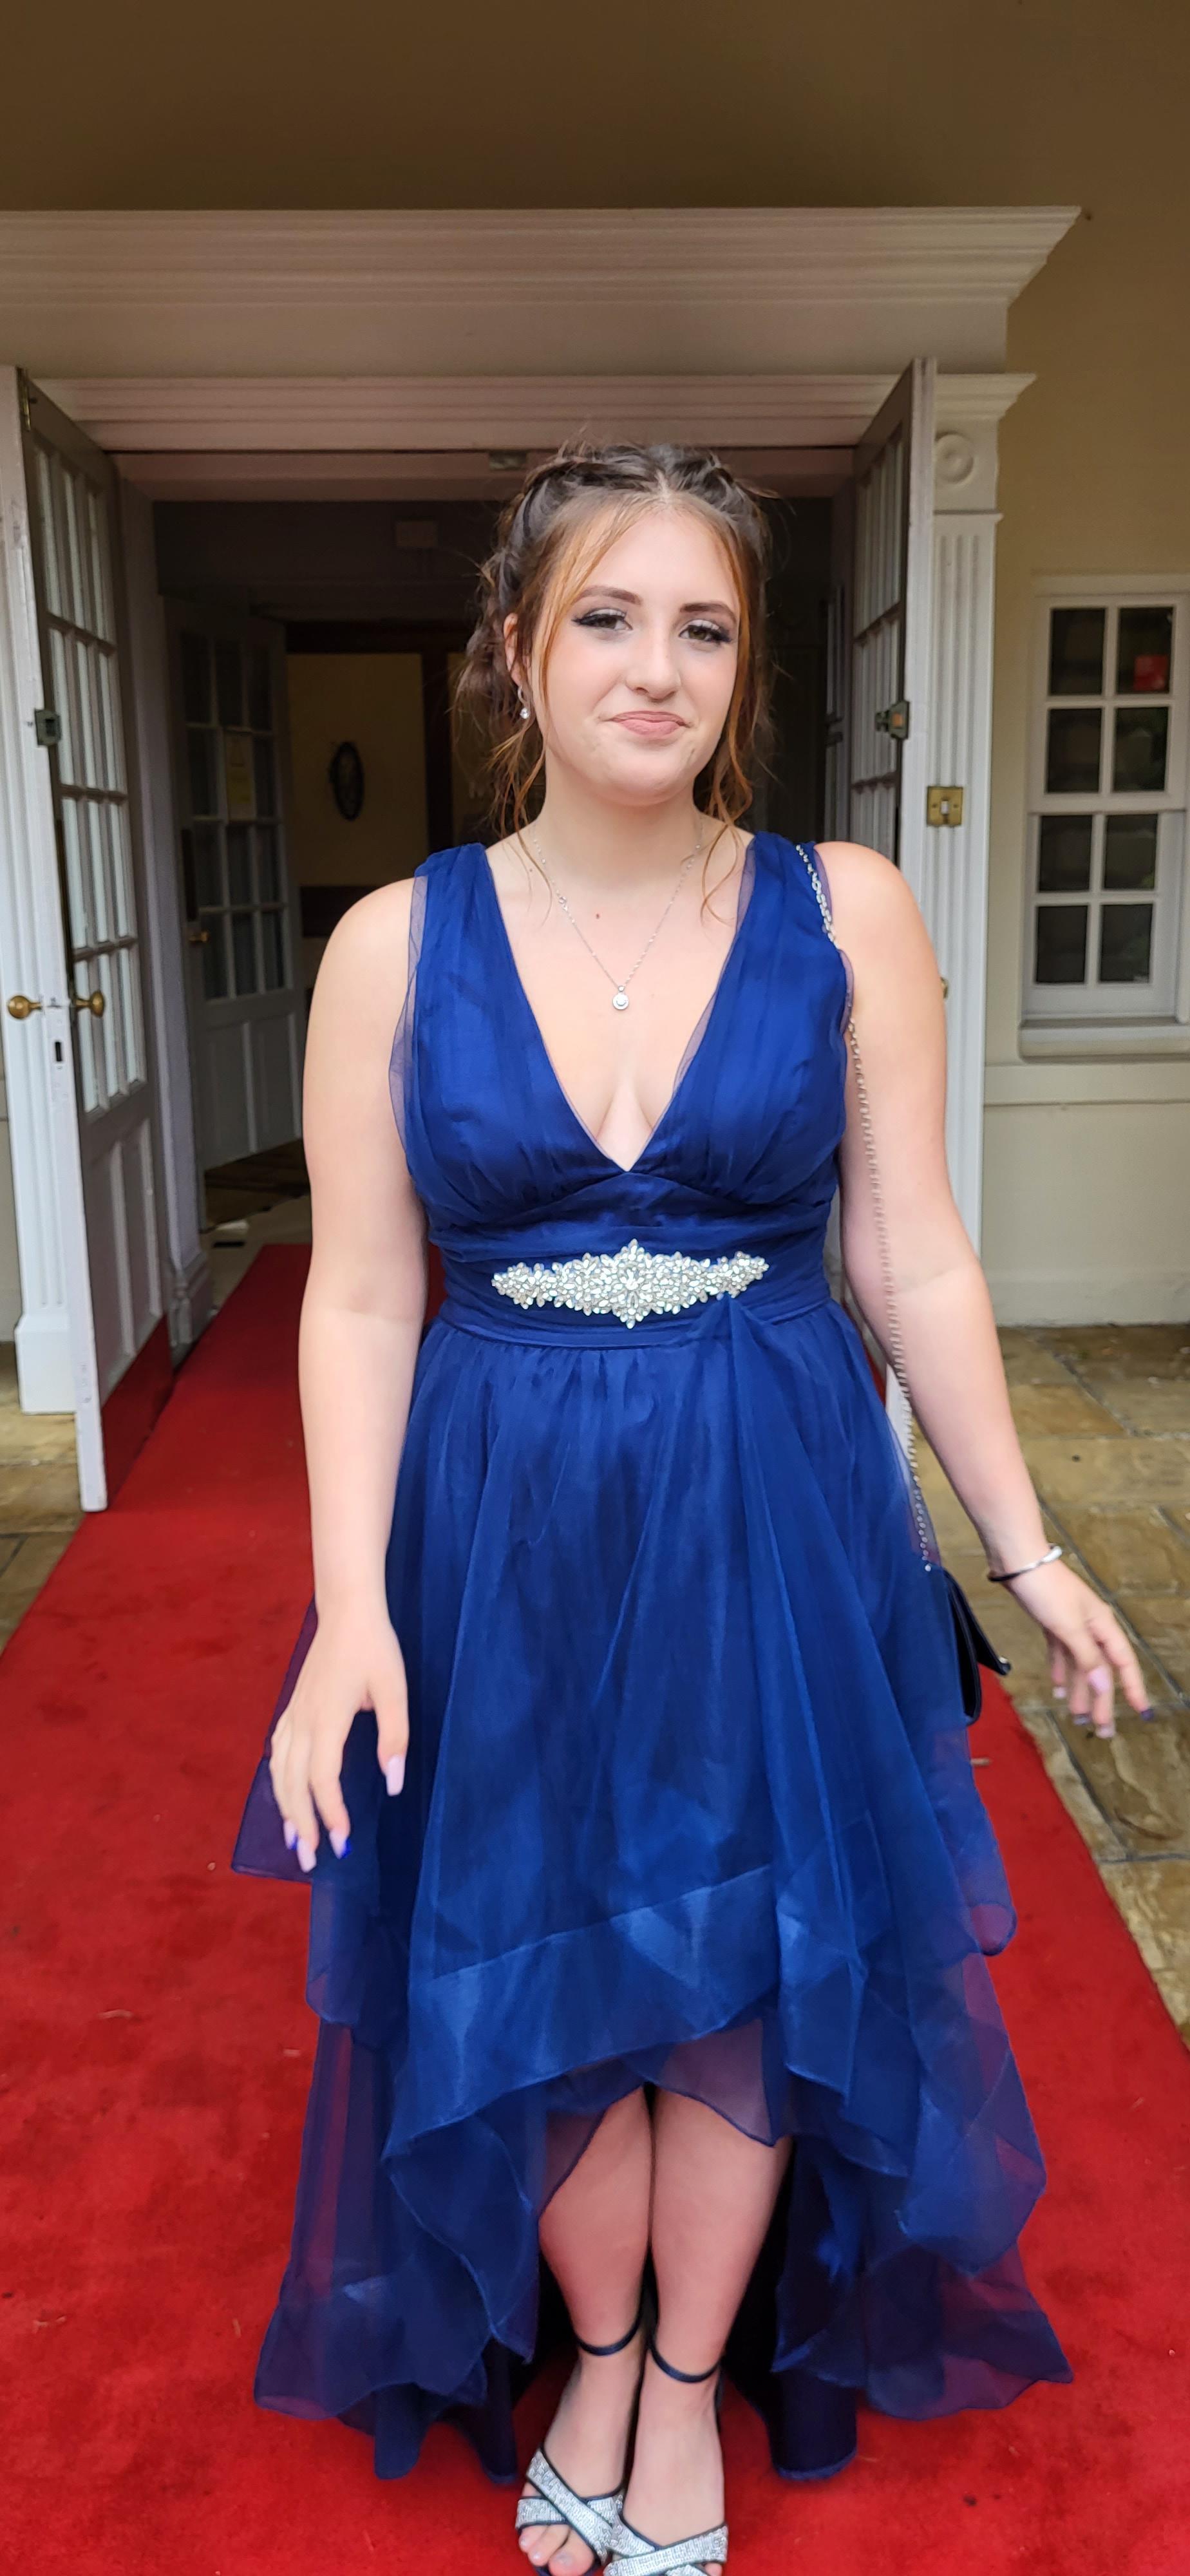 Sparkle and glitz at Hope Academys Prom 2022 St Helens Star image